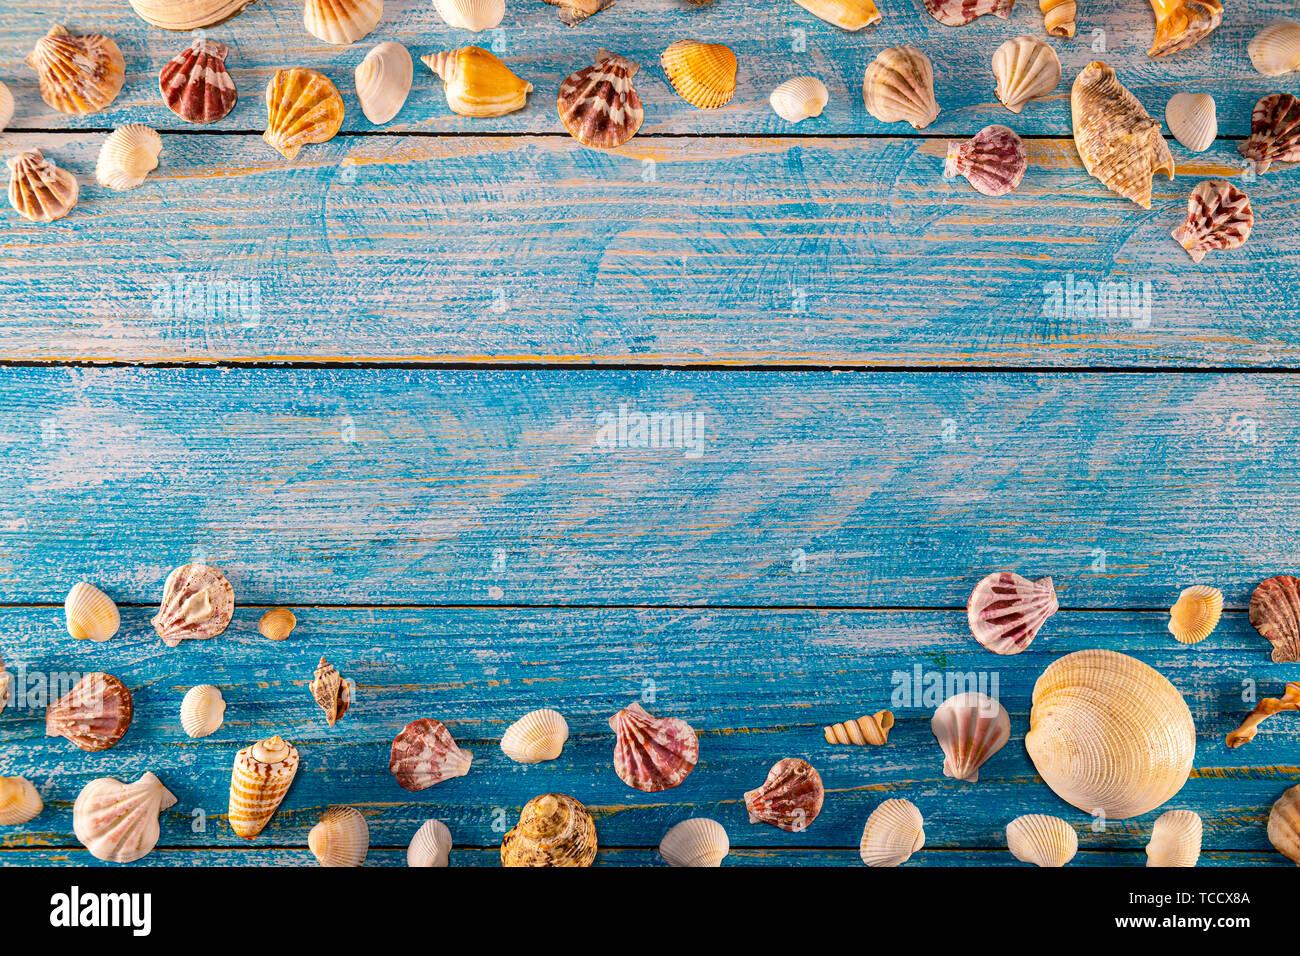 Summer time concept with sea shells on a blue wooden background. Seashells frame on wooden background nautical border. Focus on seashells. Stock Photo